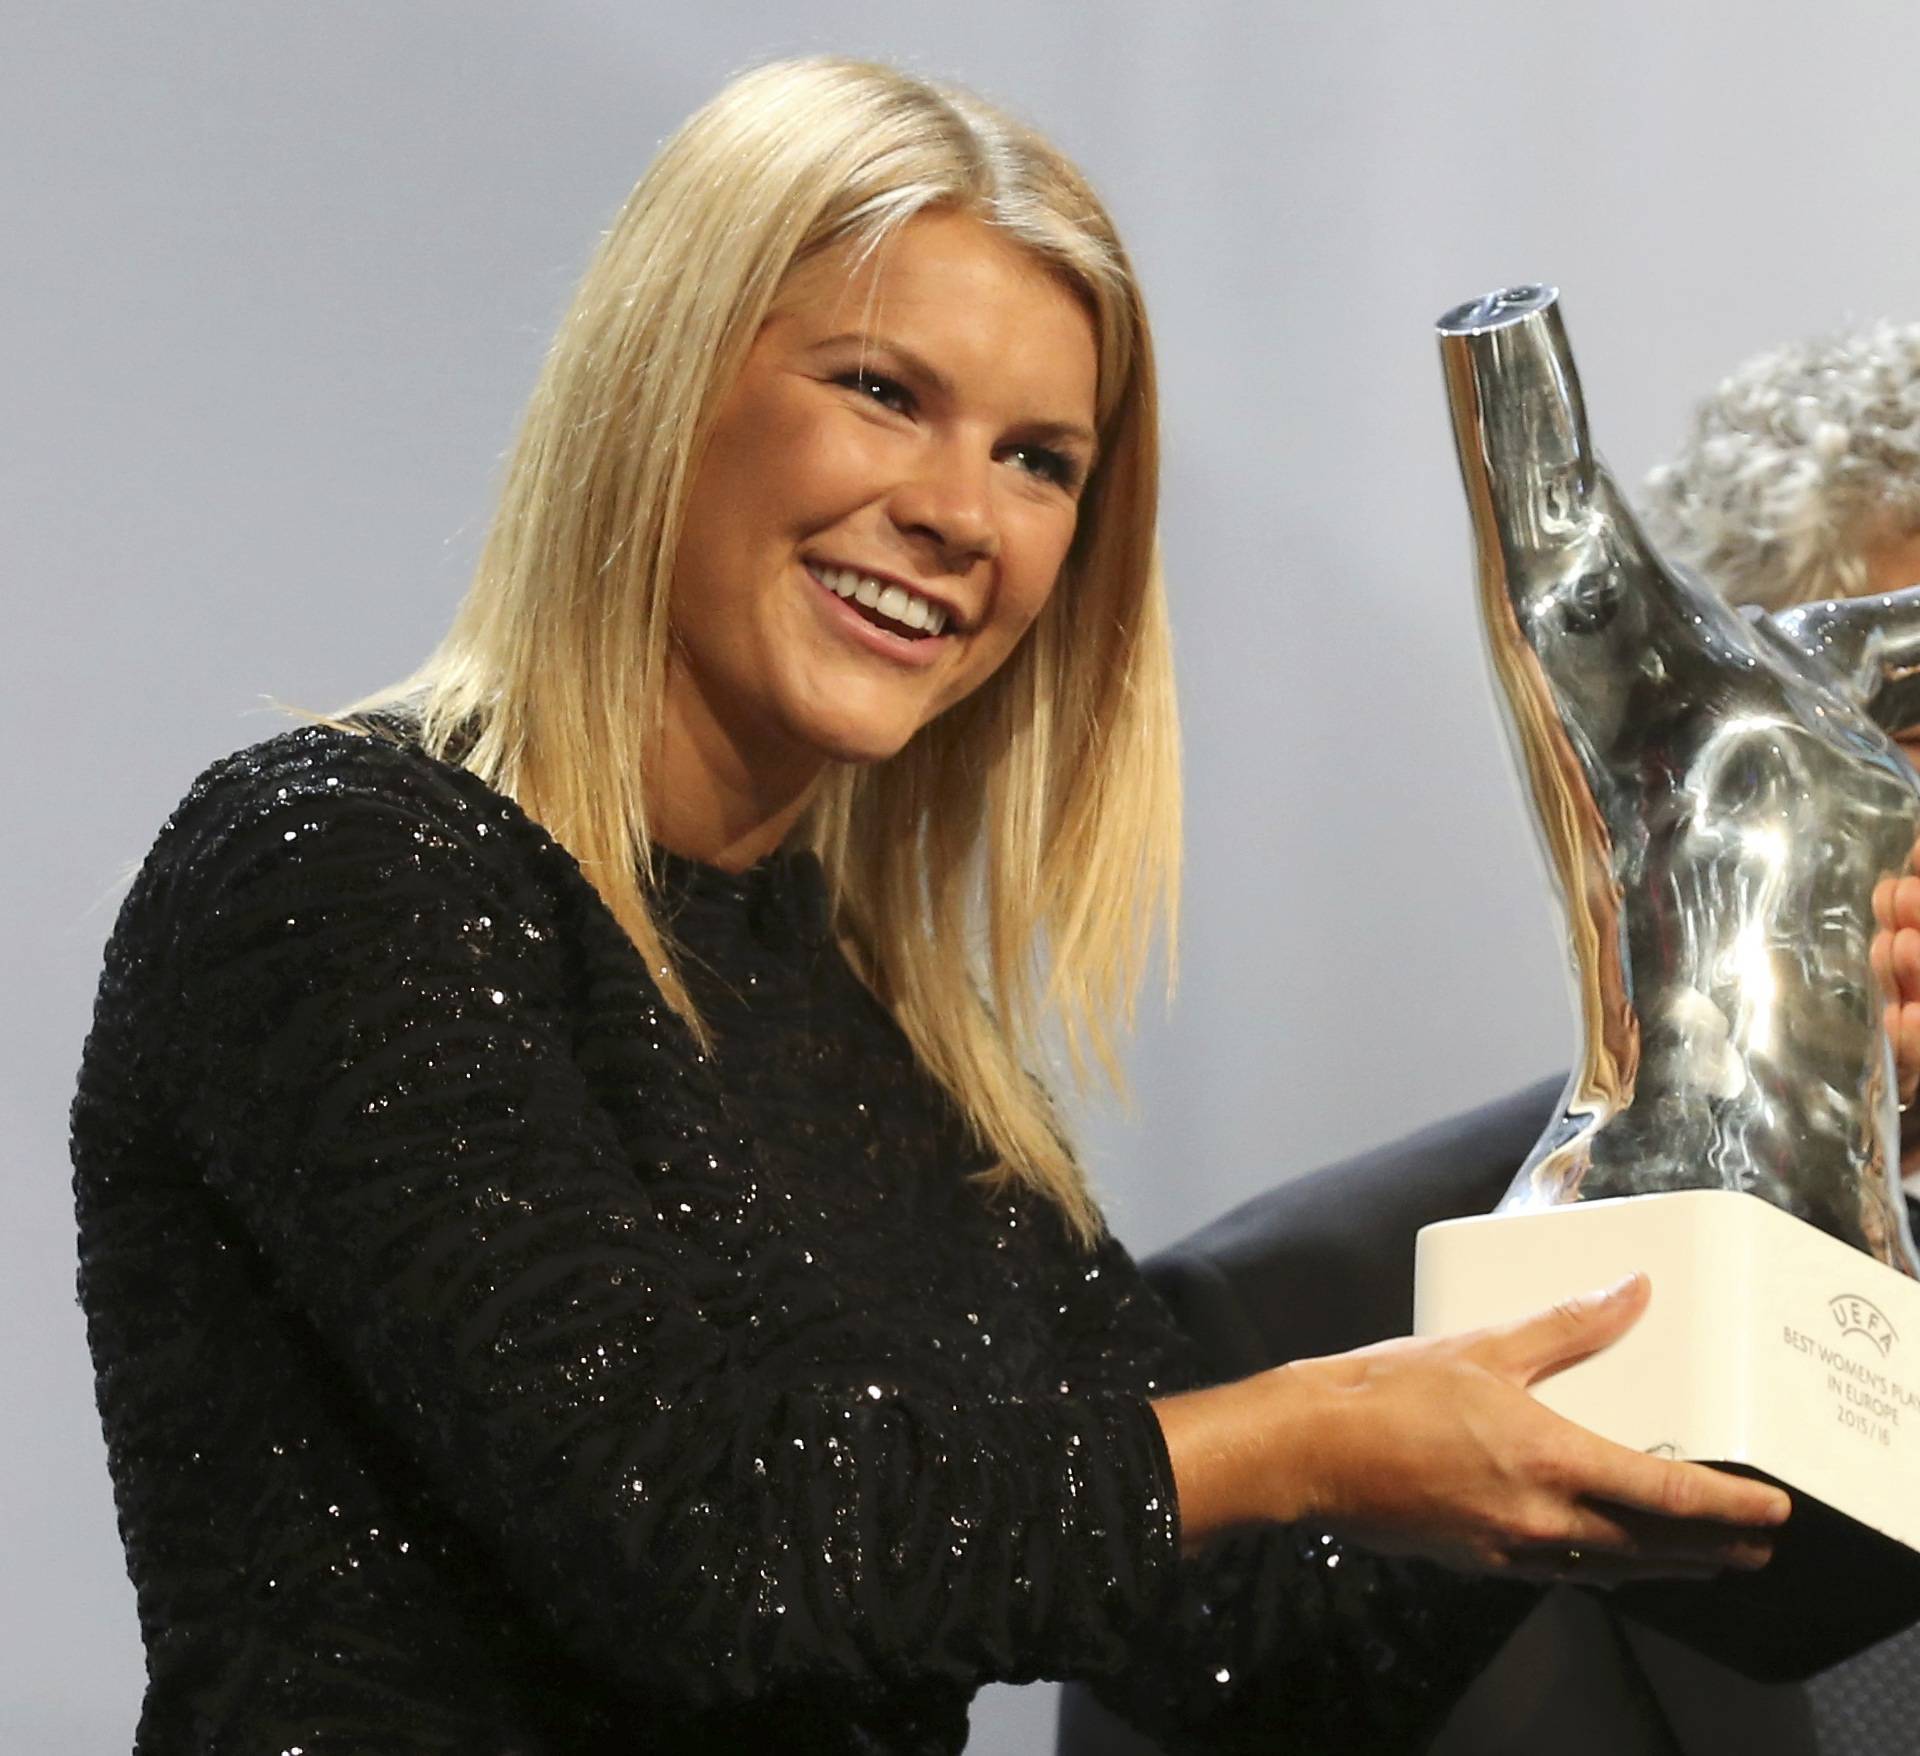 Olympique Lyon's Ada Hegerberg of Norway receives from UEFA President Angel Maria Villar the Best Player UEFA 2015/16 Award during the draw ceremony for the 2016/2017 Champions League Cup soccer competition at Monaco's Grimaldi in Monaco